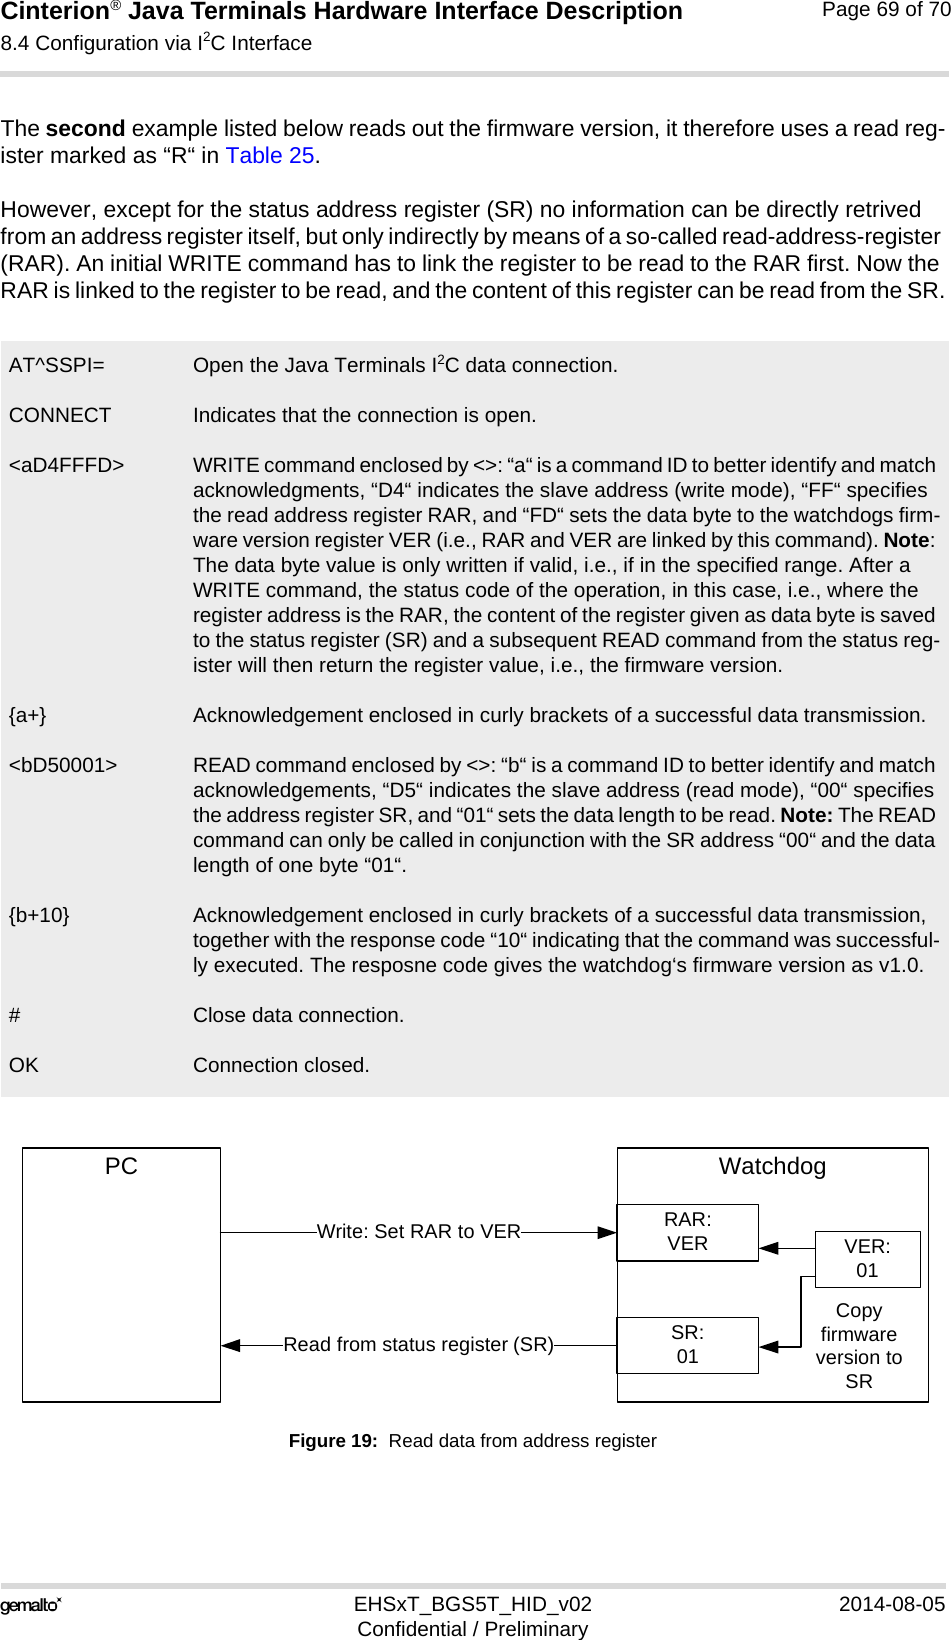 Cinterion® Java Terminals Hardware Interface Description8.4 Configuration via I2C Interface69EHSxT_BGS5T_HID_v02 2014-08-05Confidential / PreliminaryPage 69 of 70The second example listed below reads out the firmware version, it therefore uses a read reg-ister marked as “R“ in Table 25. However, except for the status address register (SR) no information can be directly retrived from an address register itself, but only indirectly by means of a so-called read-address-register (RAR). An initial WRITE command has to link the register to be read to the RAR first. Now the RAR is linked to the register to be read, and the content of this register can be read from the SR.Figure 19:  Read data from address registerAT^SSPI=CONNECT&lt;aD4FFFD&gt;{a+}&lt;bD50001&gt;{b+10}#OKOpen the Java Terminals I2C data connection. Indicates that the connection is open.WRITE command enclosed by &lt;&gt;: “a“ is a command ID to better identify and match acknowledgments, “D4“ indicates the slave address (write mode), “FF“ specifies the read address register RAR, and “FD“ sets the data byte to the watchdogs firm-ware version register VER (i.e., RAR and VER are linked by this command). Note: The data byte value is only written if valid, i.e., if in the specified range. After a WRITE command, the status code of the operation, in this case, i.e., where the register address is the RAR, the content of the register given as data byte is saved to the status register (SR) and a subsequent READ command from the status reg-ister will then return the register value, i.e., the firmware version.Acknowledgement enclosed in curly brackets of a successful data transmission.READ command enclosed by &lt;&gt;: “b“ is a command ID to better identify and match acknowledgements, “D5“ indicates the slave address (read mode), “00“ specifies the address register SR, and “01“ sets the data length to be read. Note: The READ command can only be called in conjunction with the SR address “00“ and the data length of one byte “01“.Acknowledgement enclosed in curly brackets of a successful data transmission, together with the response code “10“ indicating that the command was successful-ly executed. The resposne code gives the watchdog‘s firmware version as v1.0.Close data connection.Connection closed.PC WatchdogWrite: Set RAR to VER RAR:VERSR:01Read from status register (SR)Copy firmware version to SRVER:01